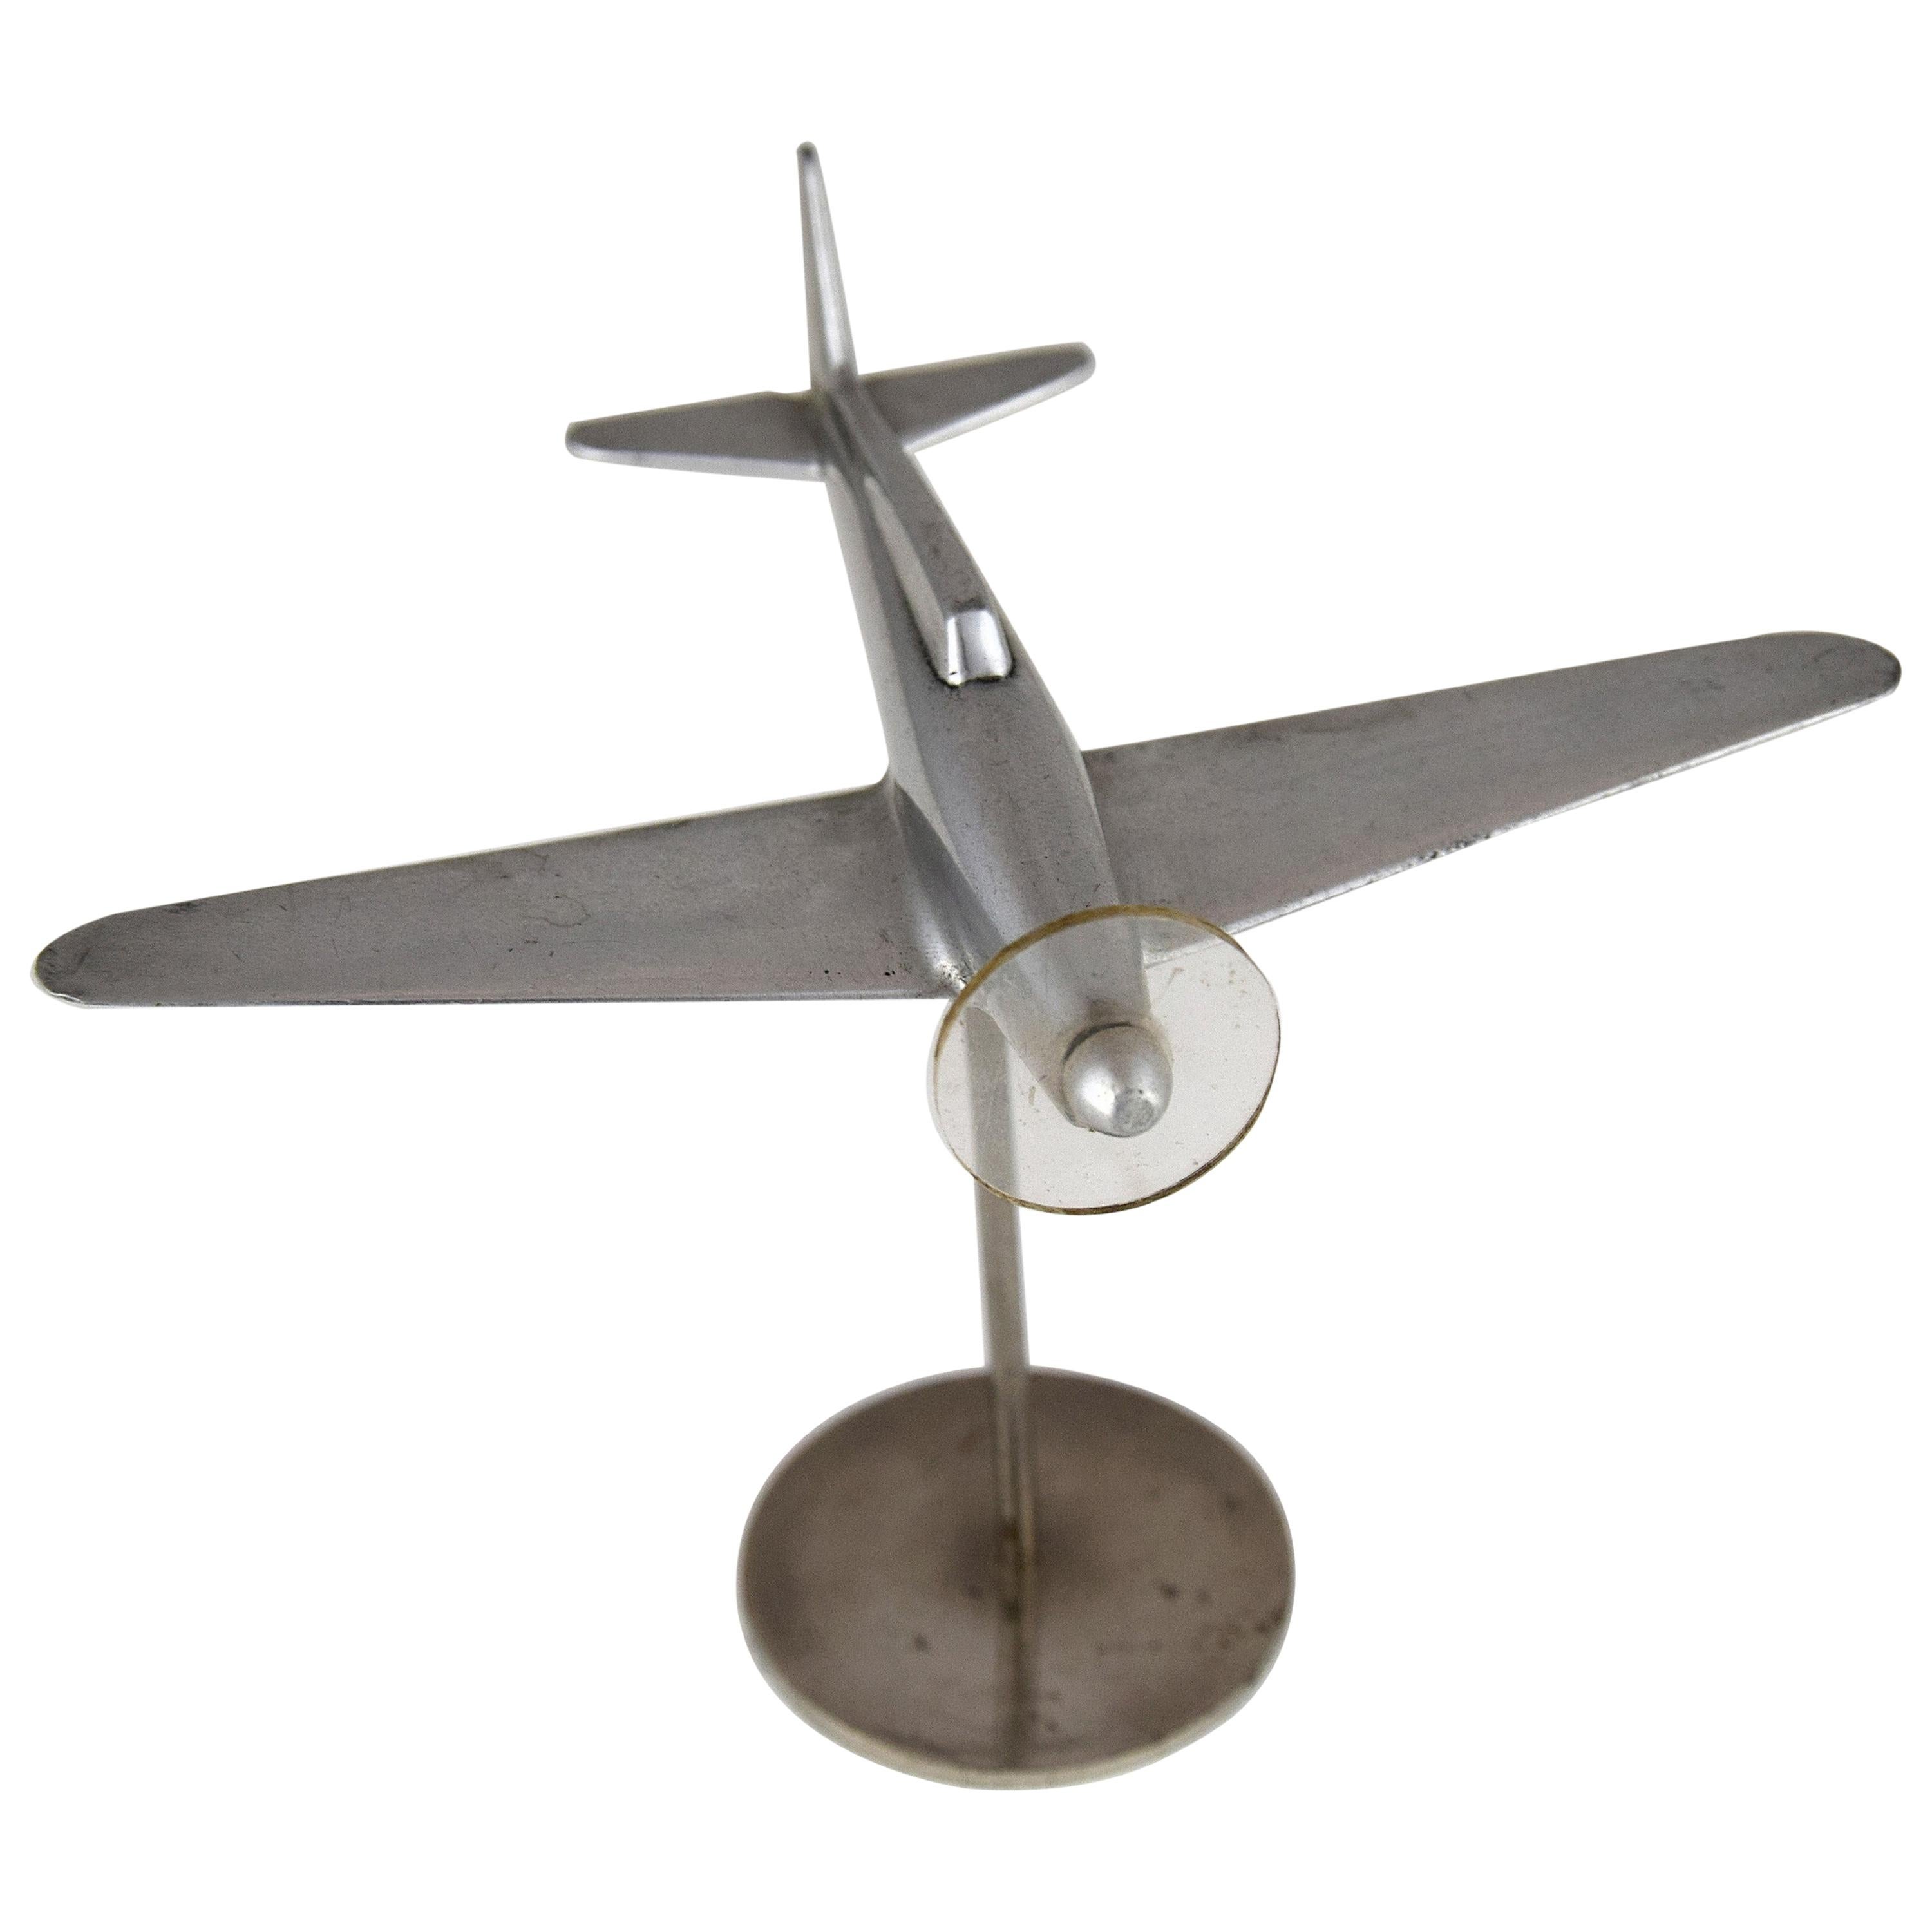 Midcentury Spitfire Fighter Aircraft Model